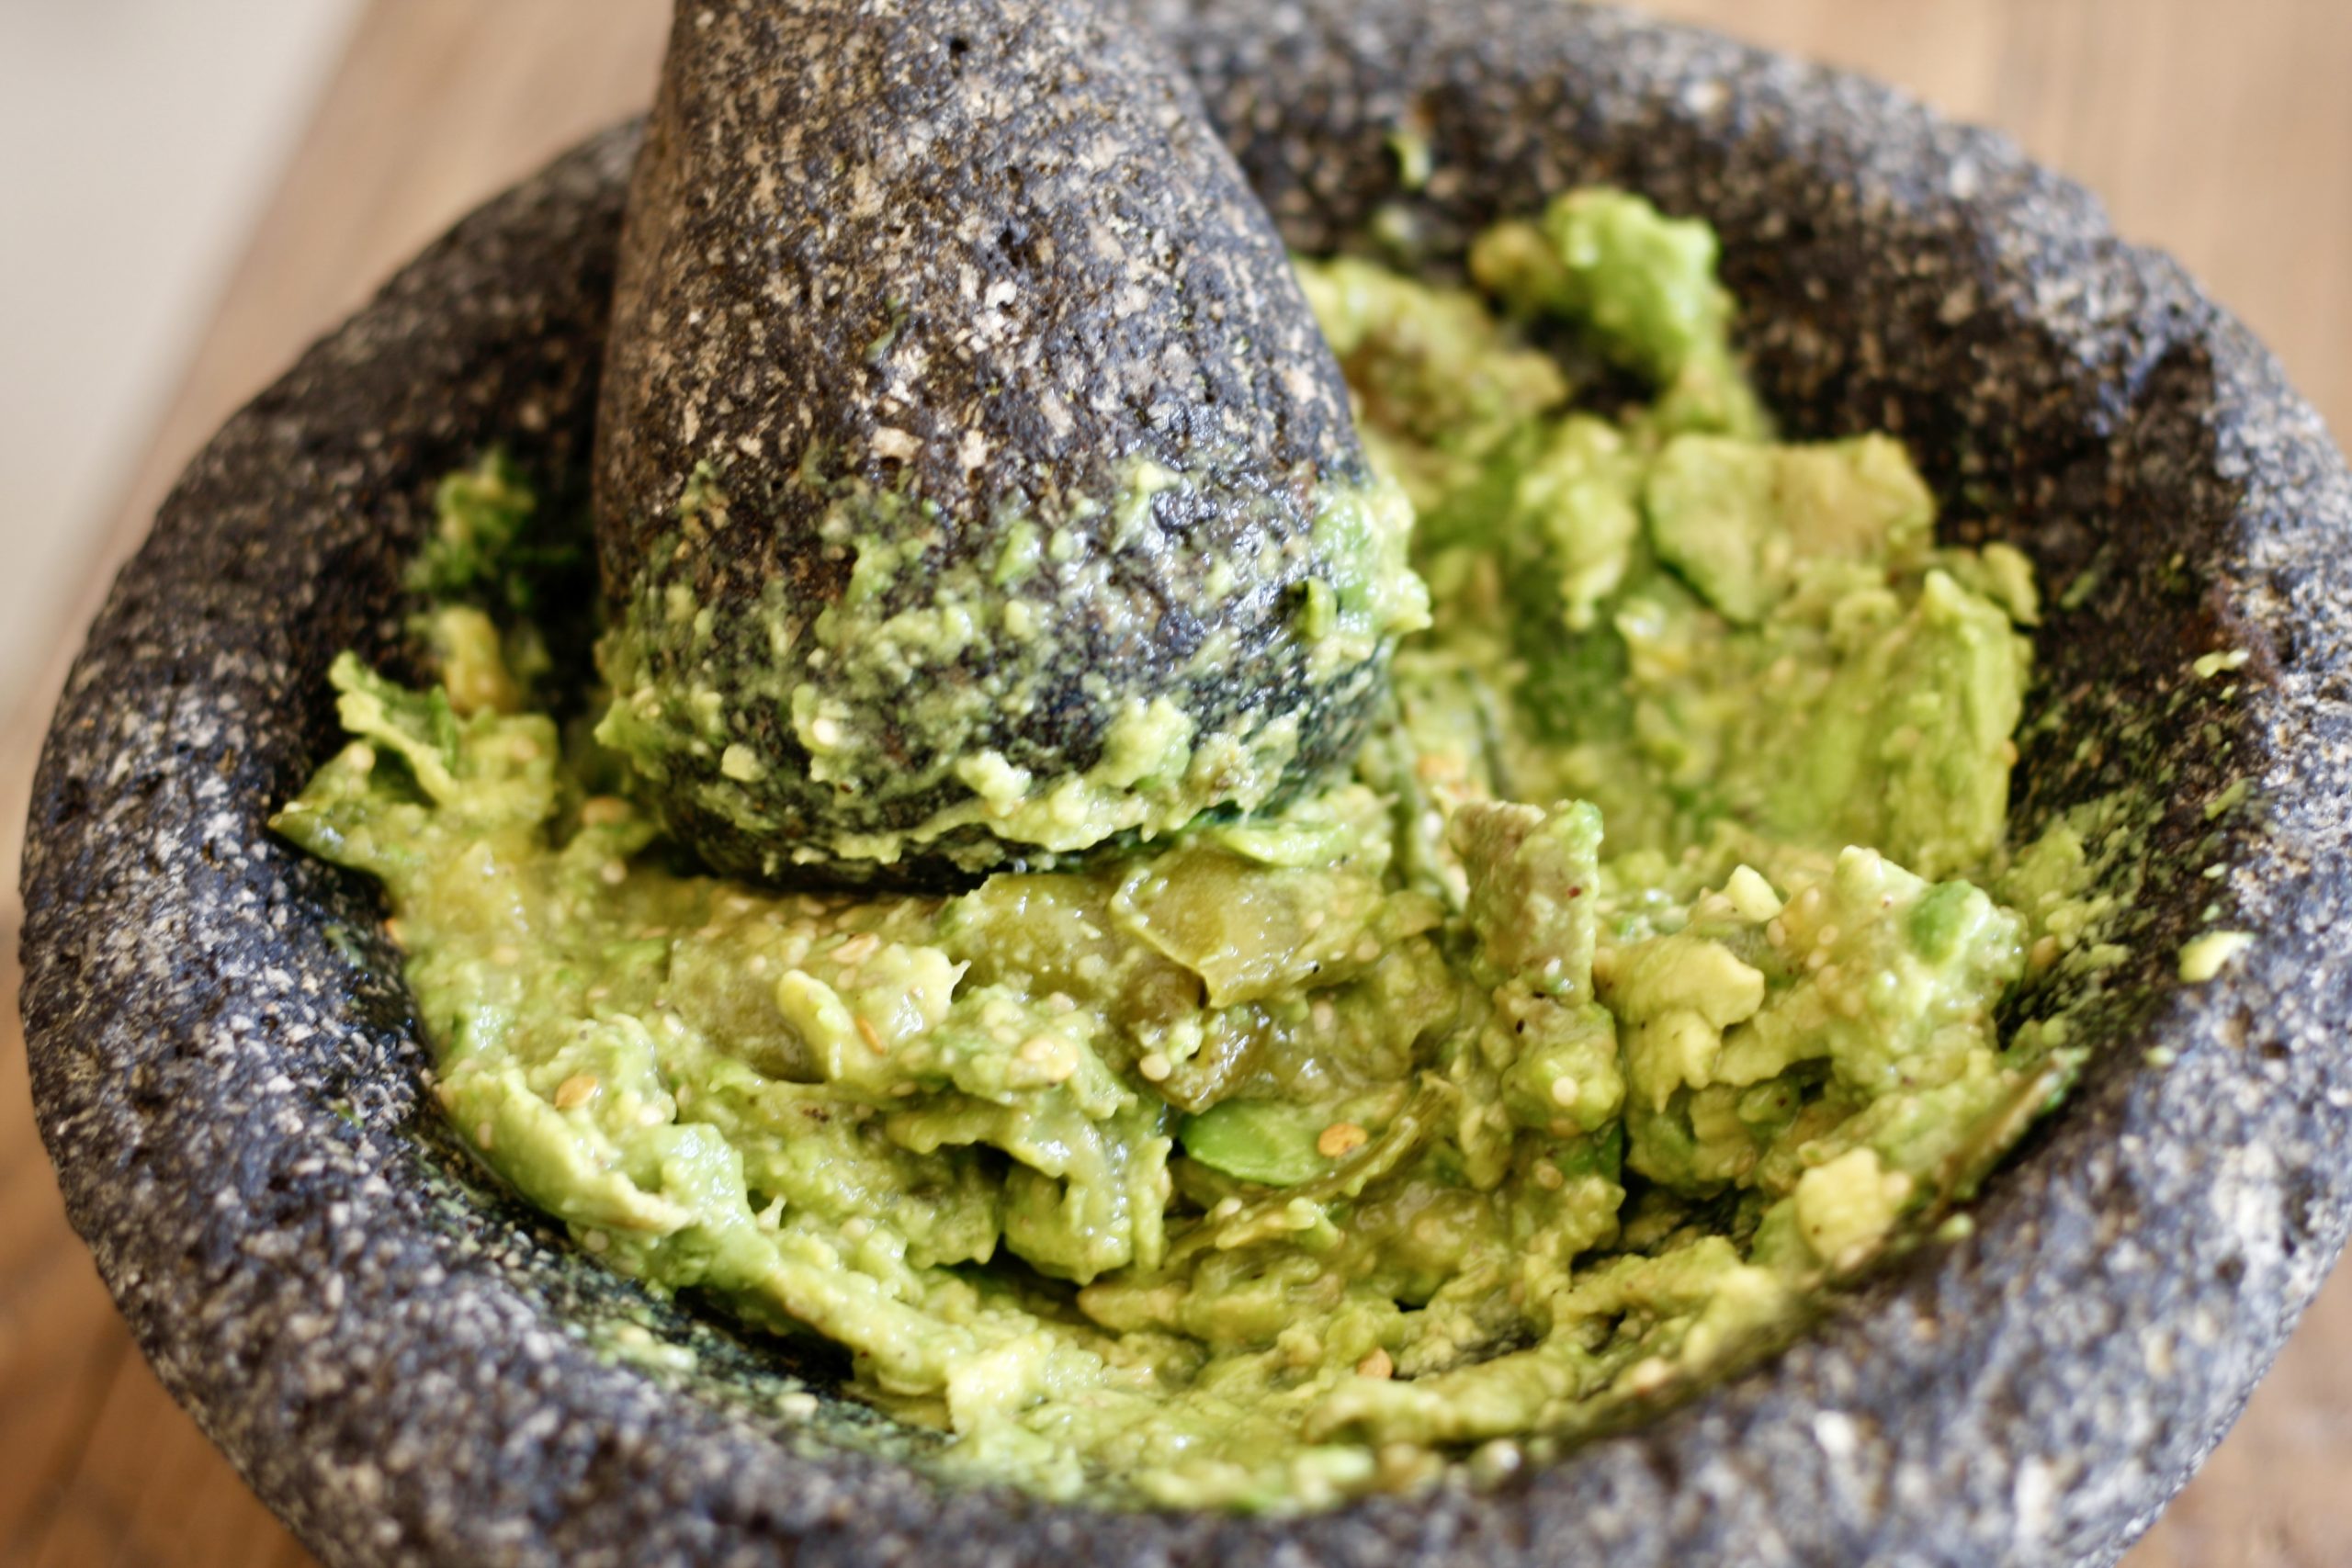 Guacamole in a molcajete with a pestle